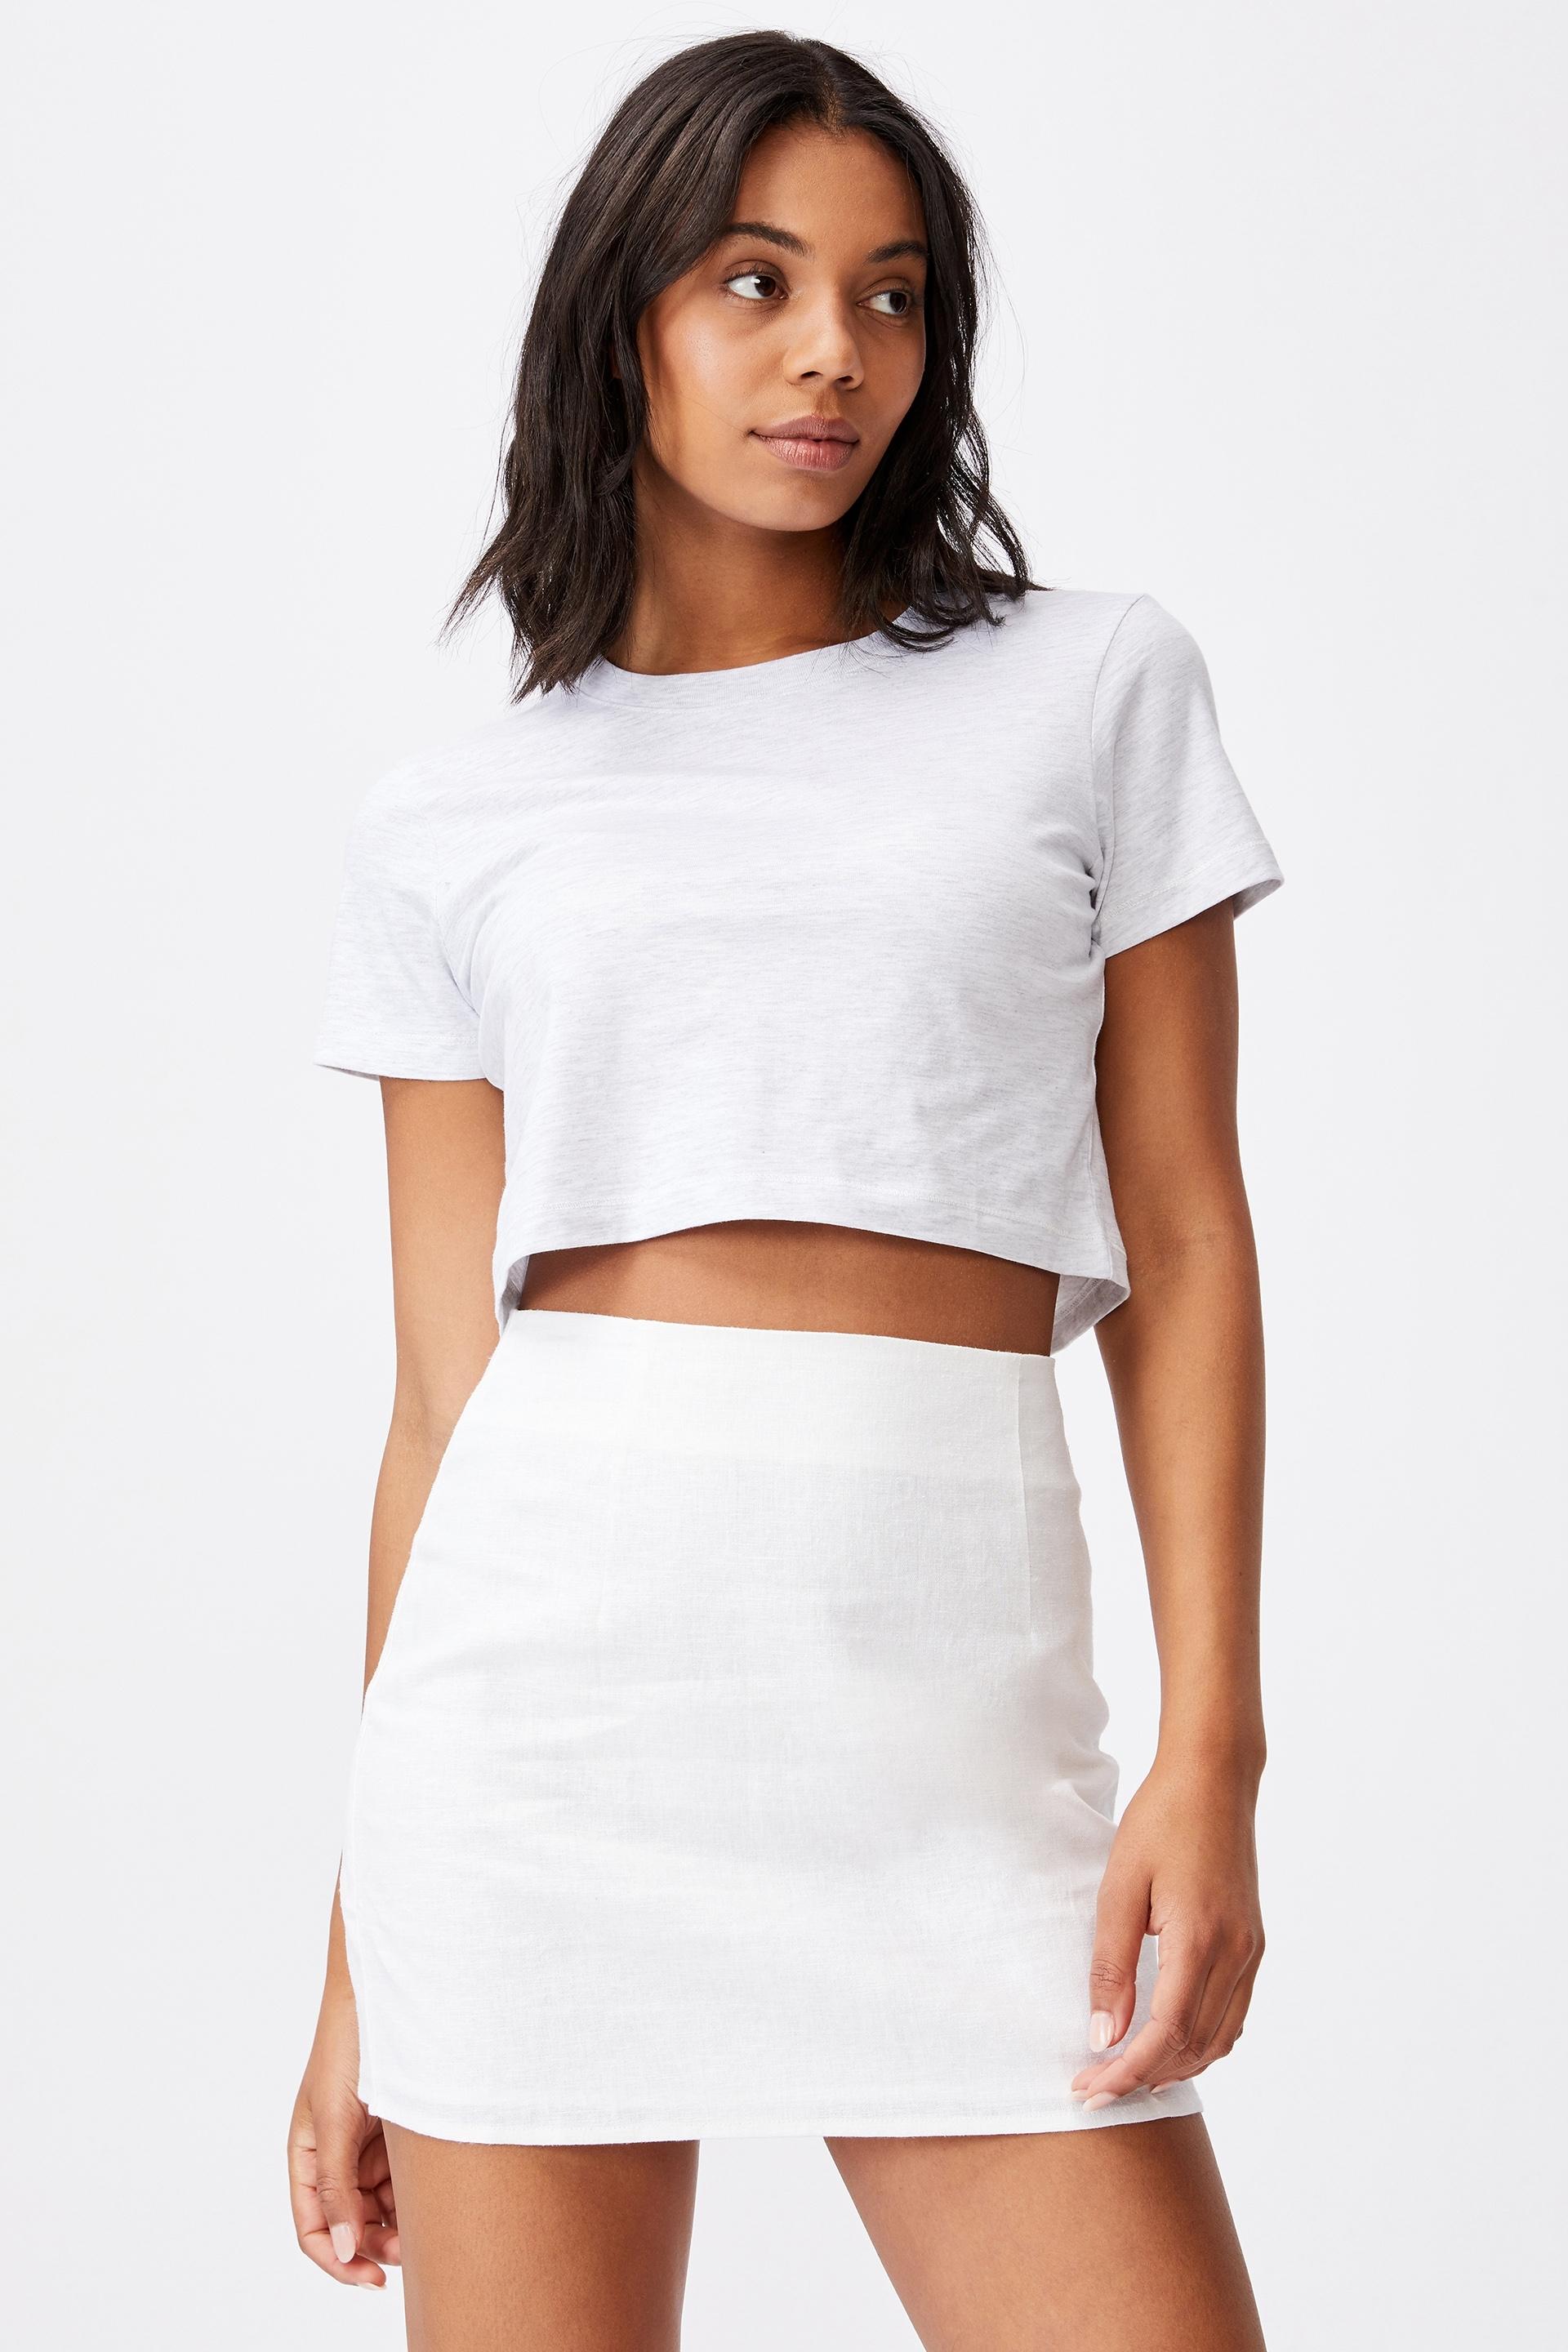 Ultimate A Line Mini Skirt White Cotton On Skirts